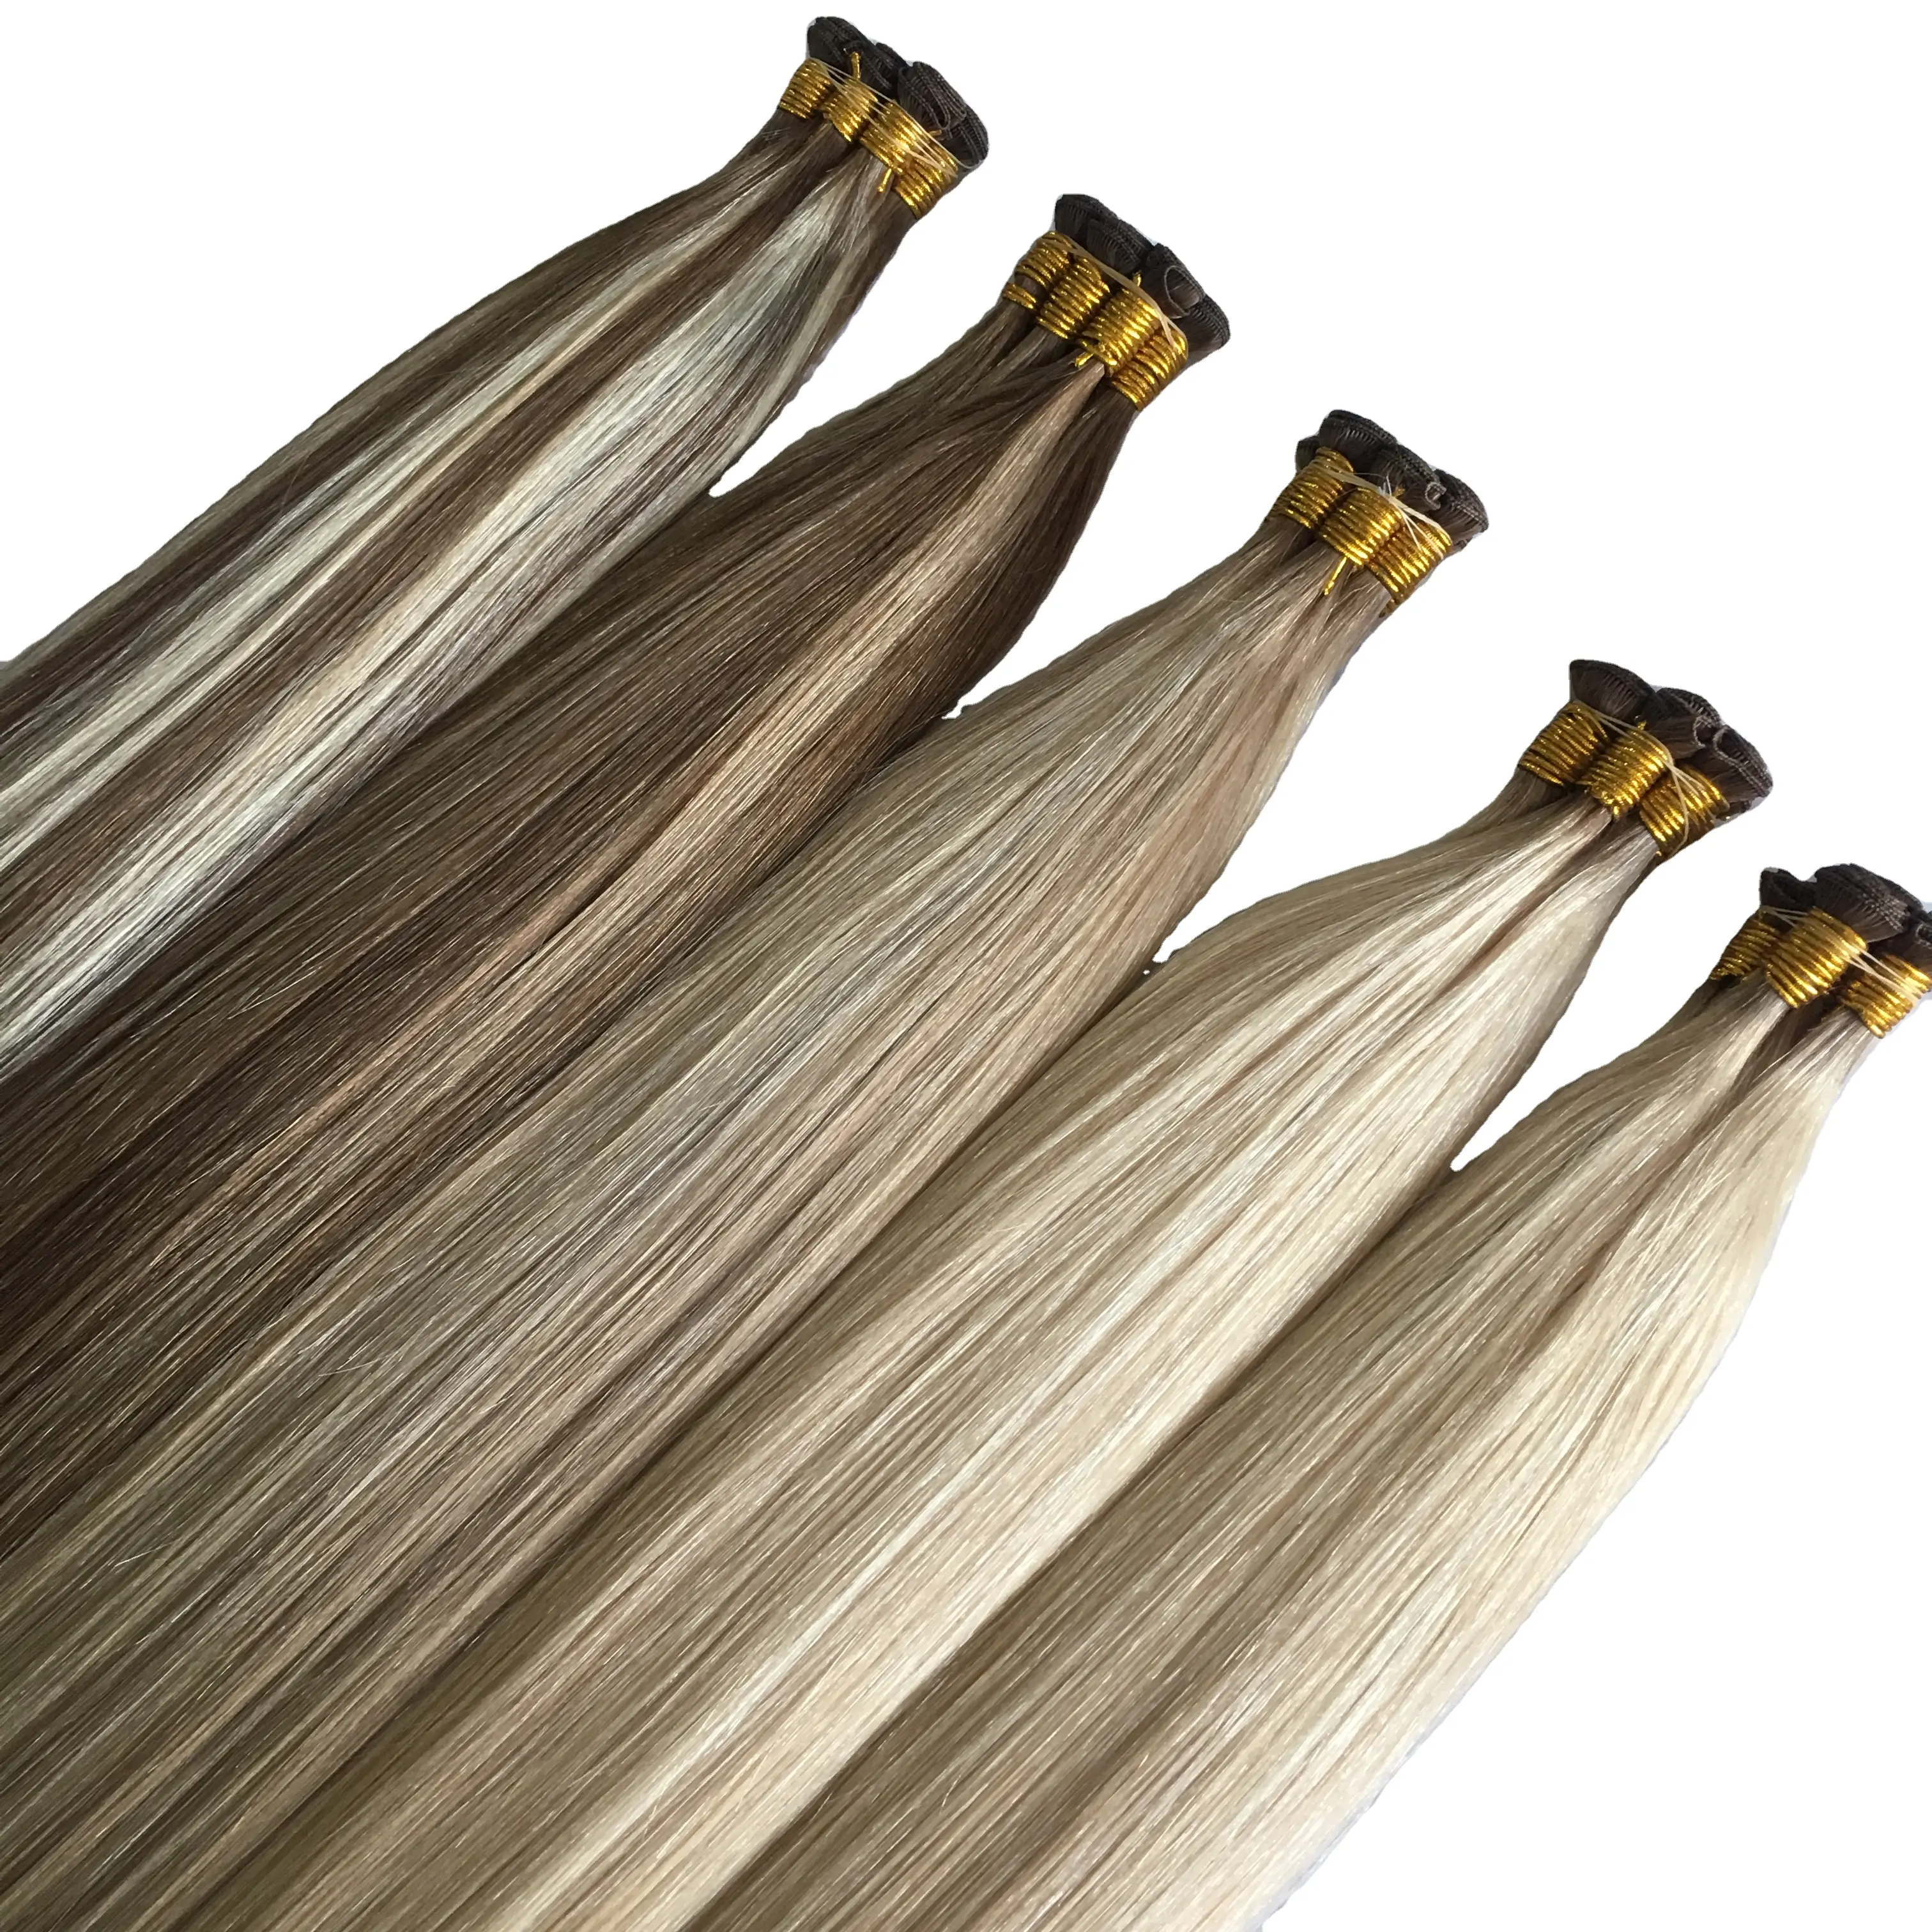 100% human hair Russian hair double drawn thick end hand tied weft with cuticle intact handtied weft high end market hair